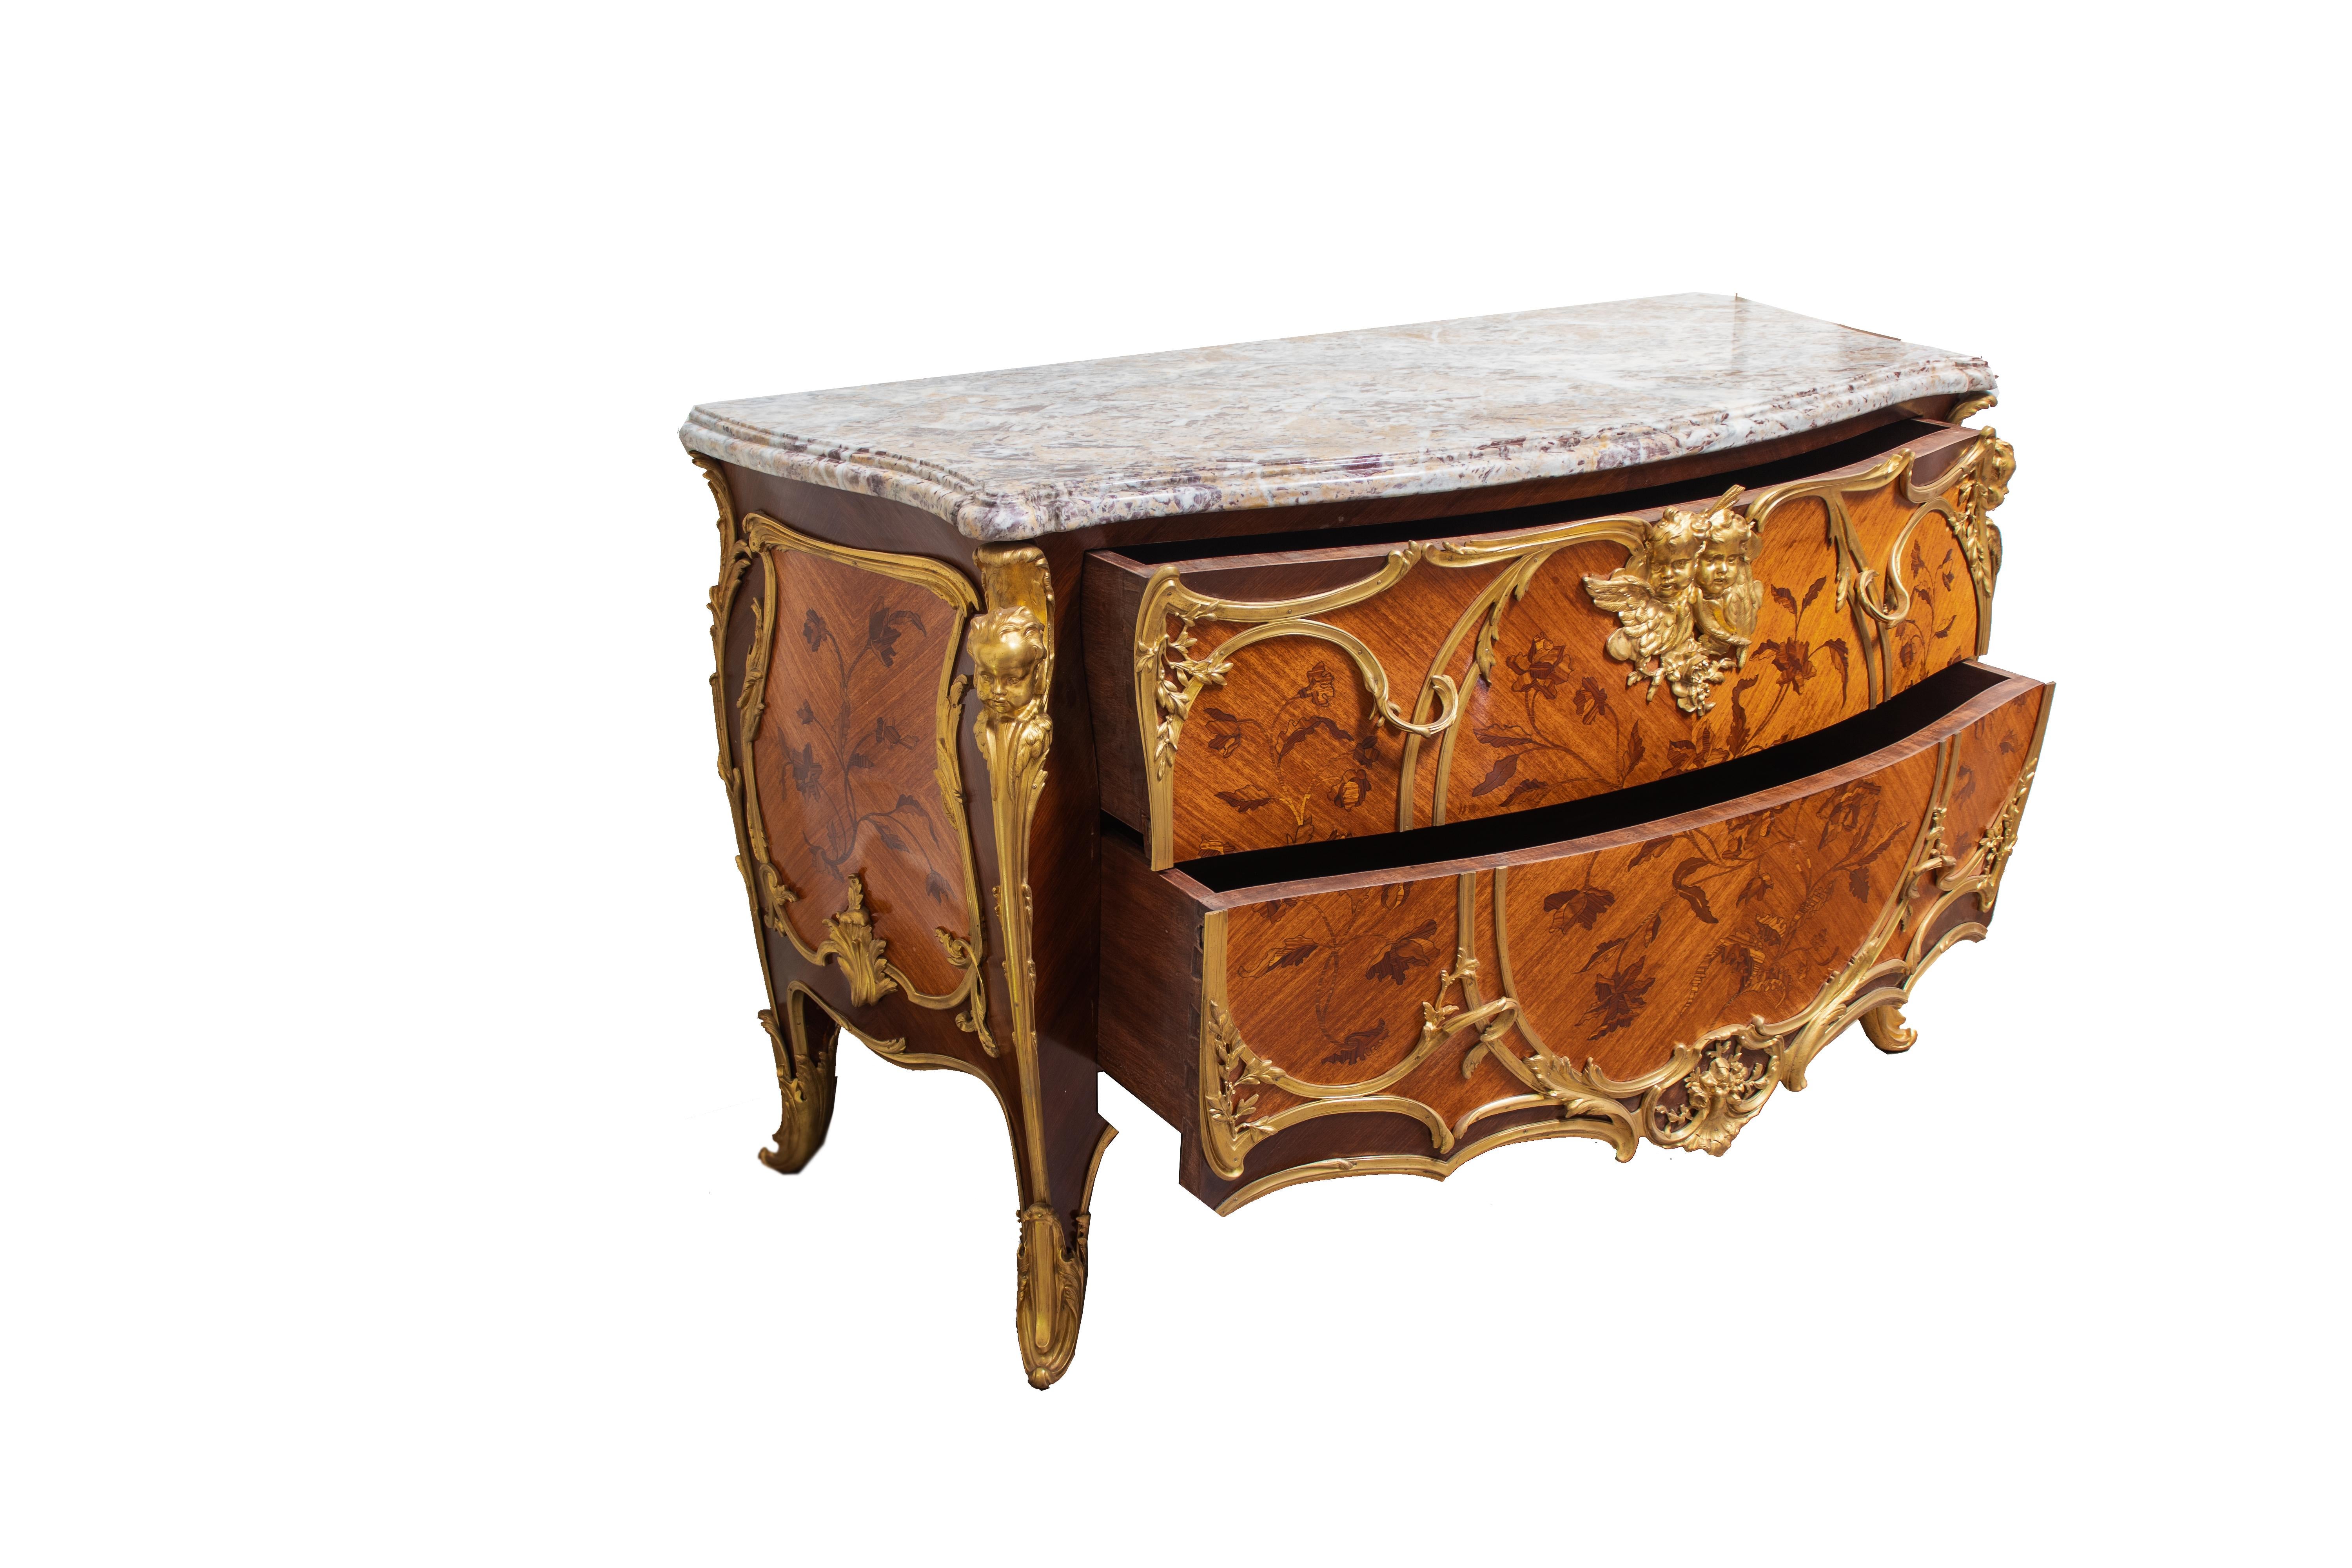 Pair of French Commodes in Louis XV style with Ormolu Mounts and Marquetry For Sale 2